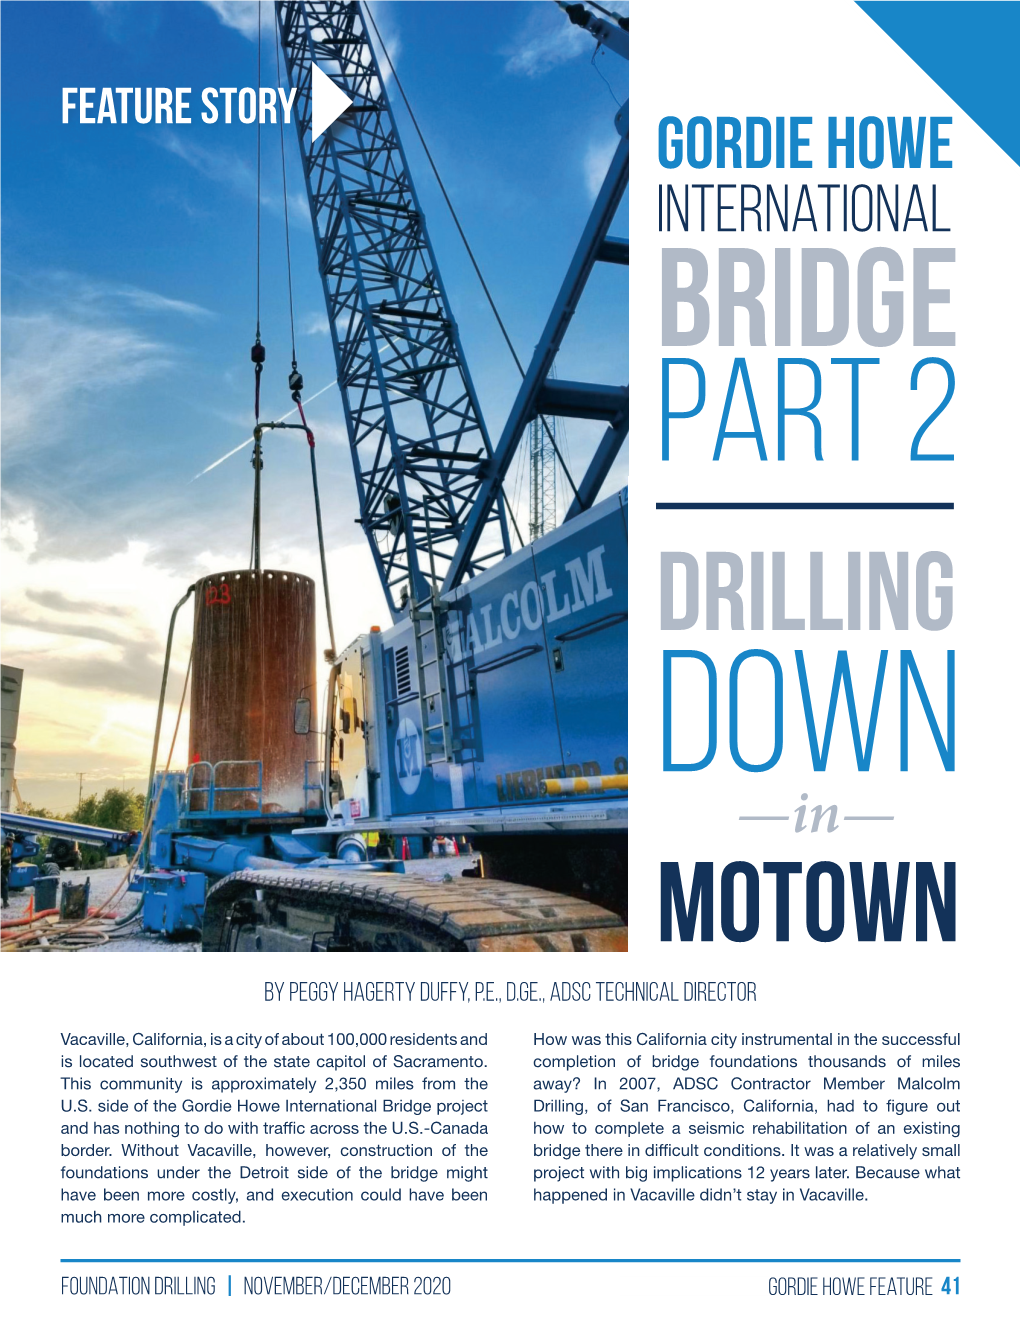 Gordie Howe International Bridge Part 2 Drilling Down —In— Motown by PEGGY HAGERTY DUFFY, P.E., D.GE., ADSC TECHNICAL DIRECTOR